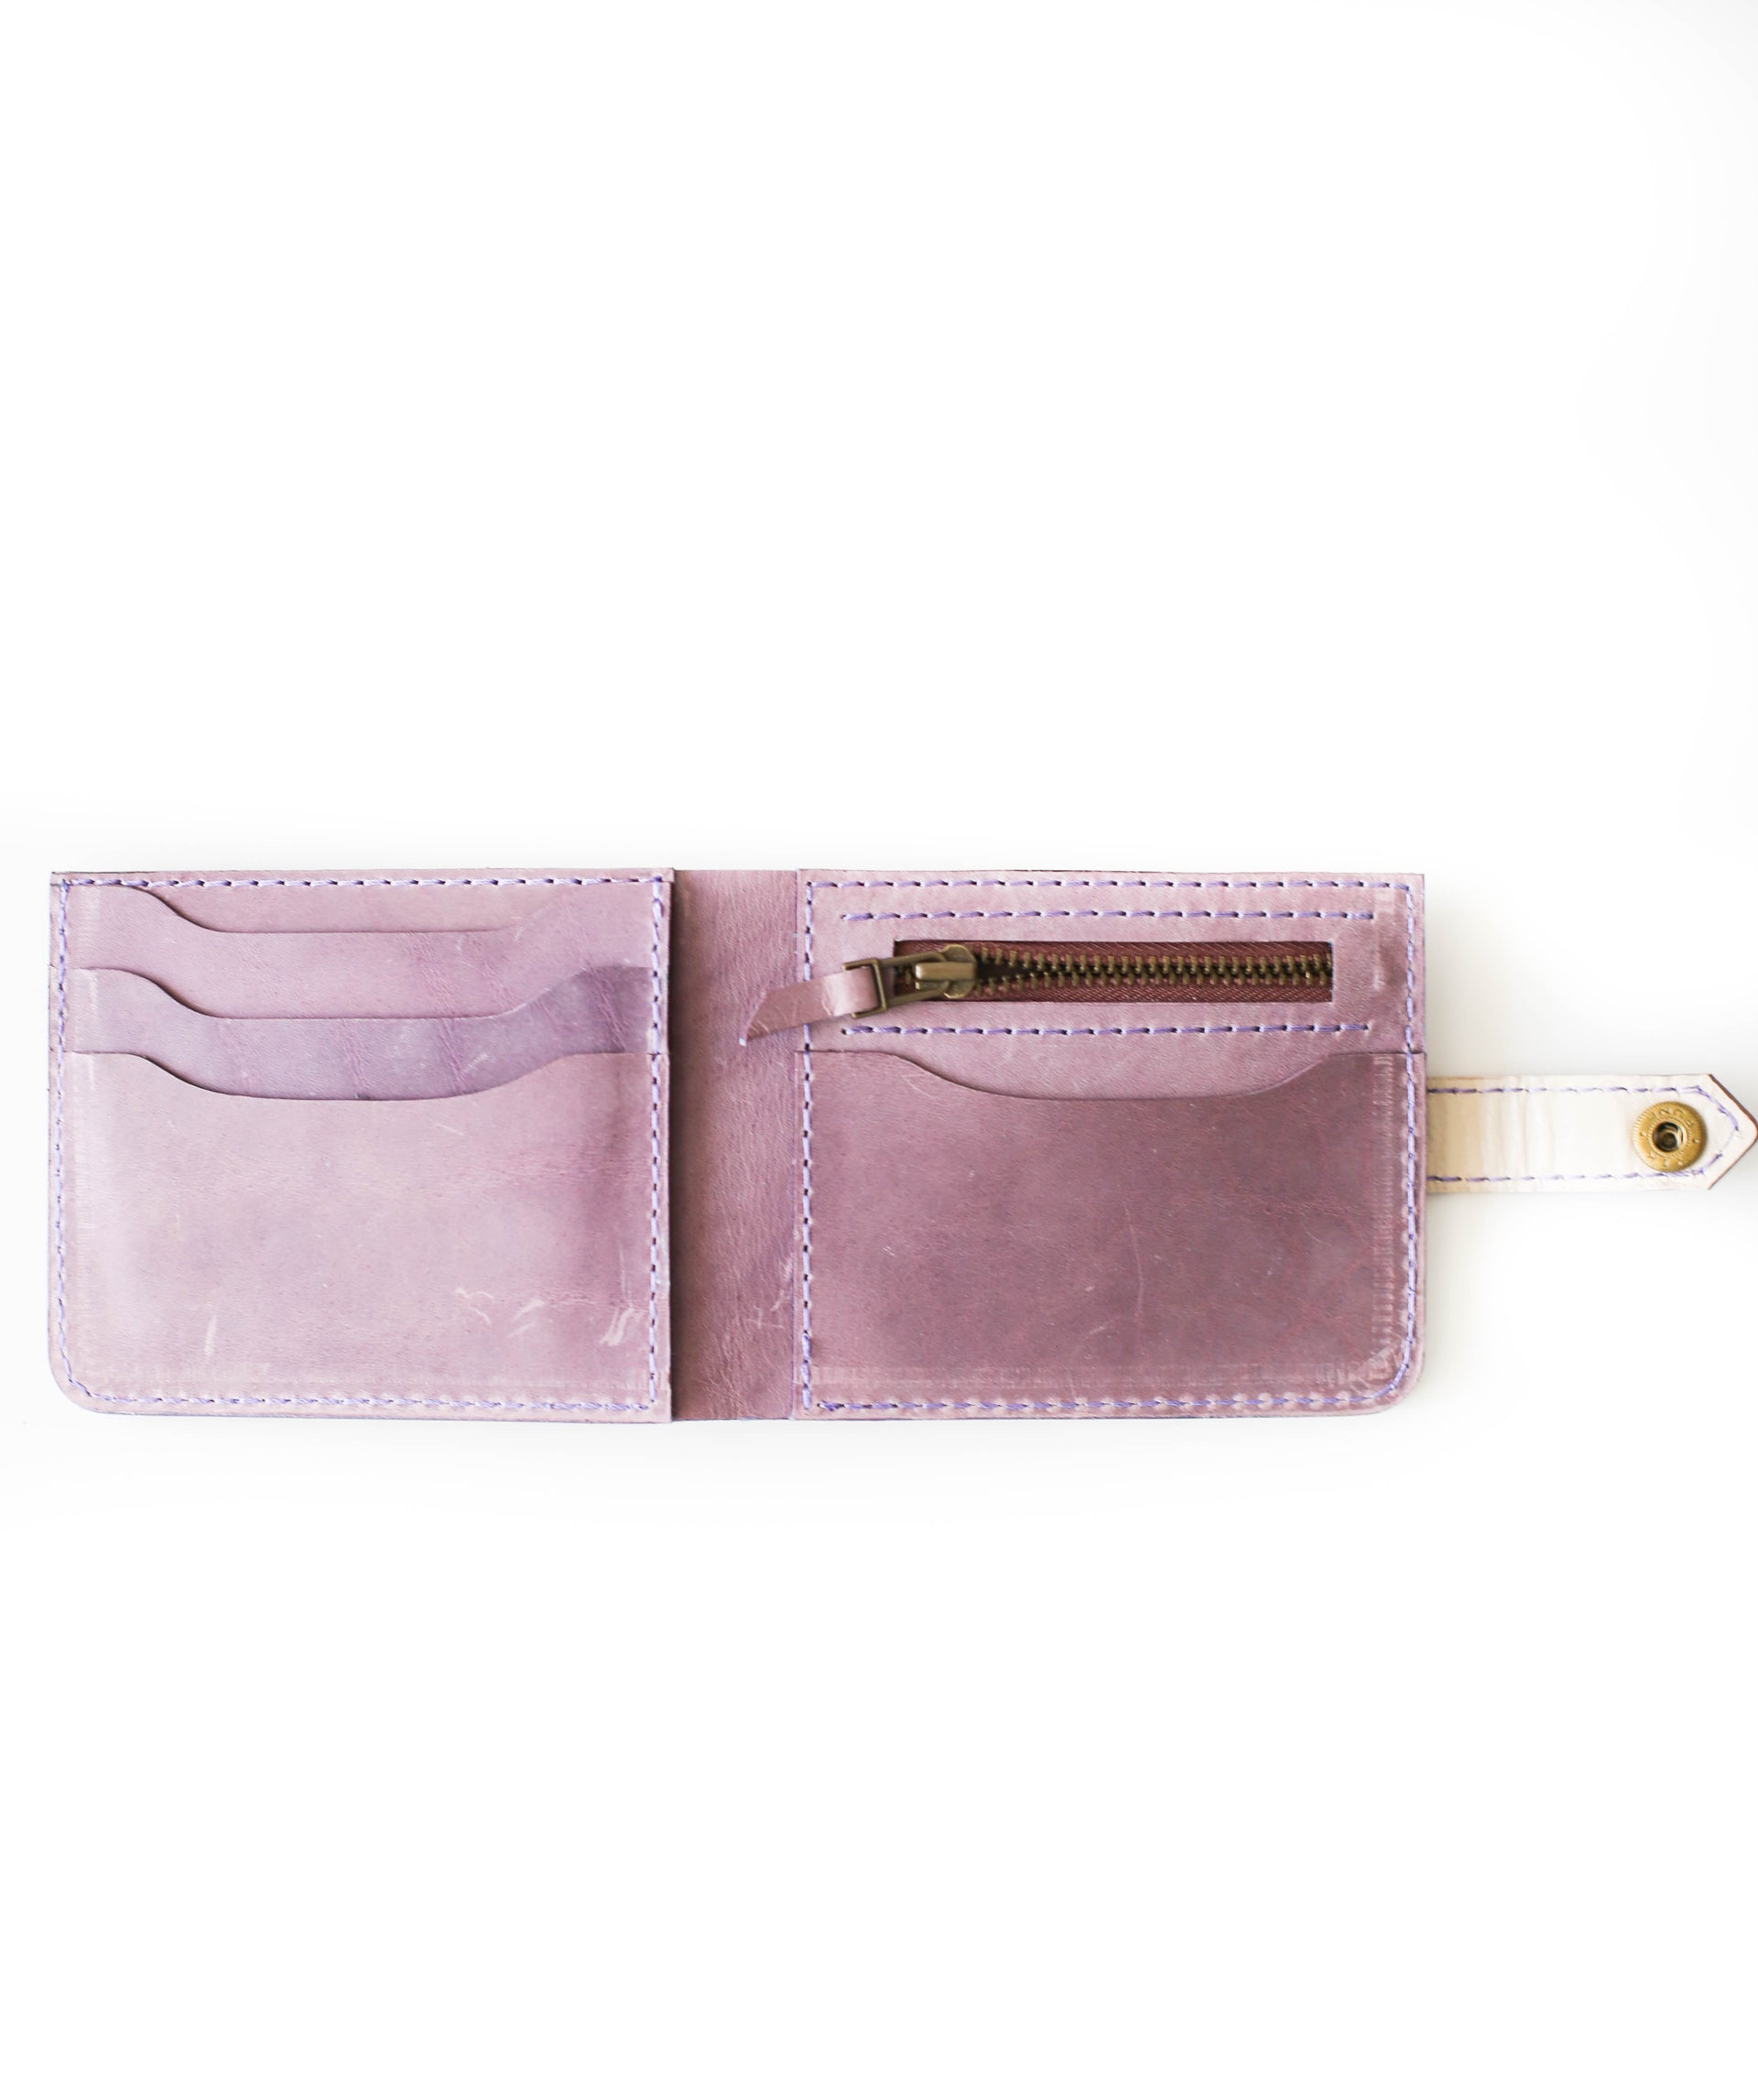 Slim Leather Wallet | Small Leather Bifold Wallet | Womens Style 1